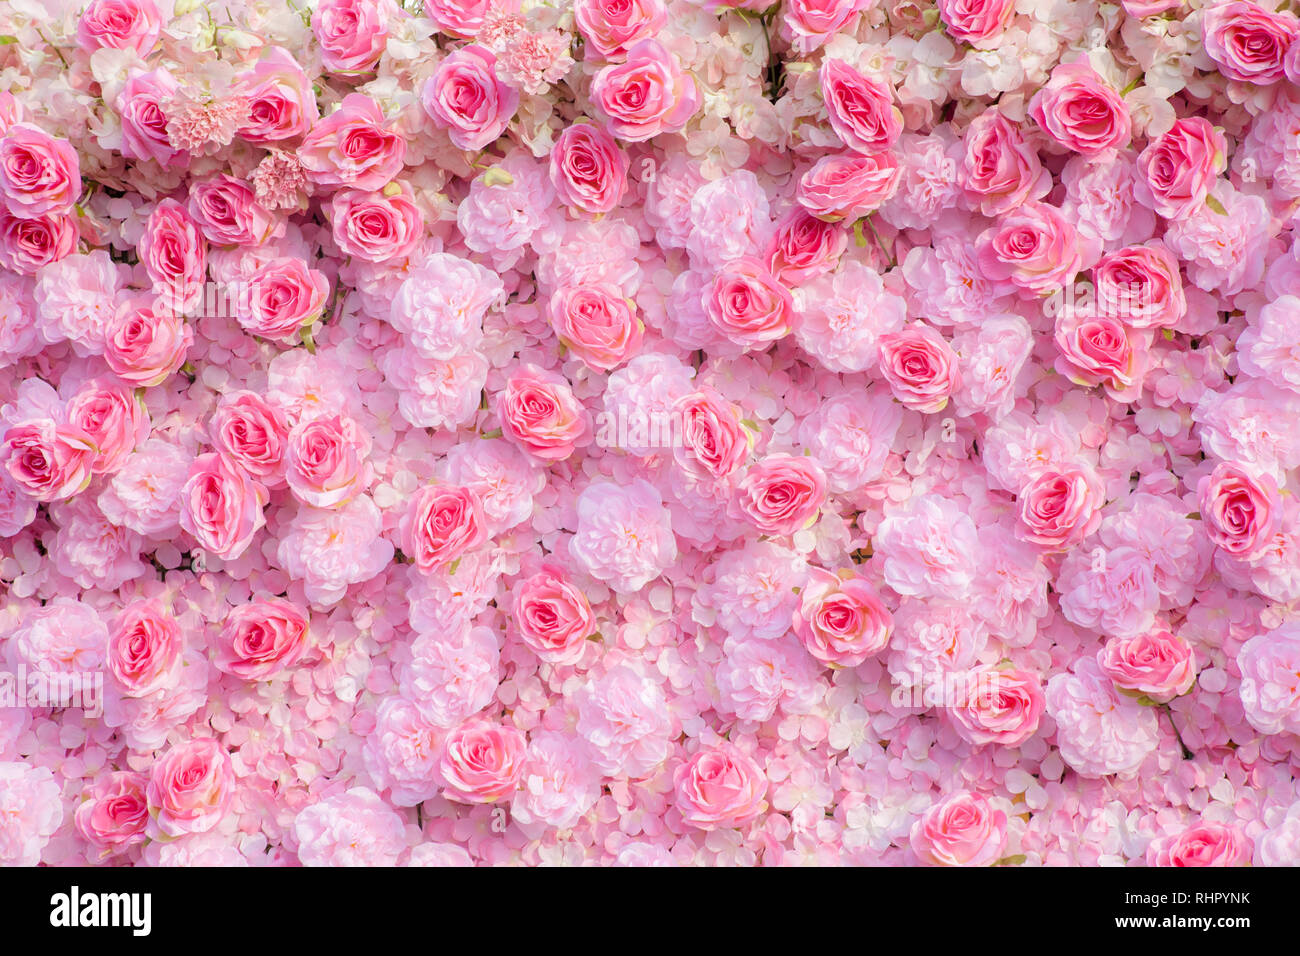 Fresh Flowers Bouquet Of Pink Roses Hd Desktop Backgrounds Free Download   Wallpapers13com